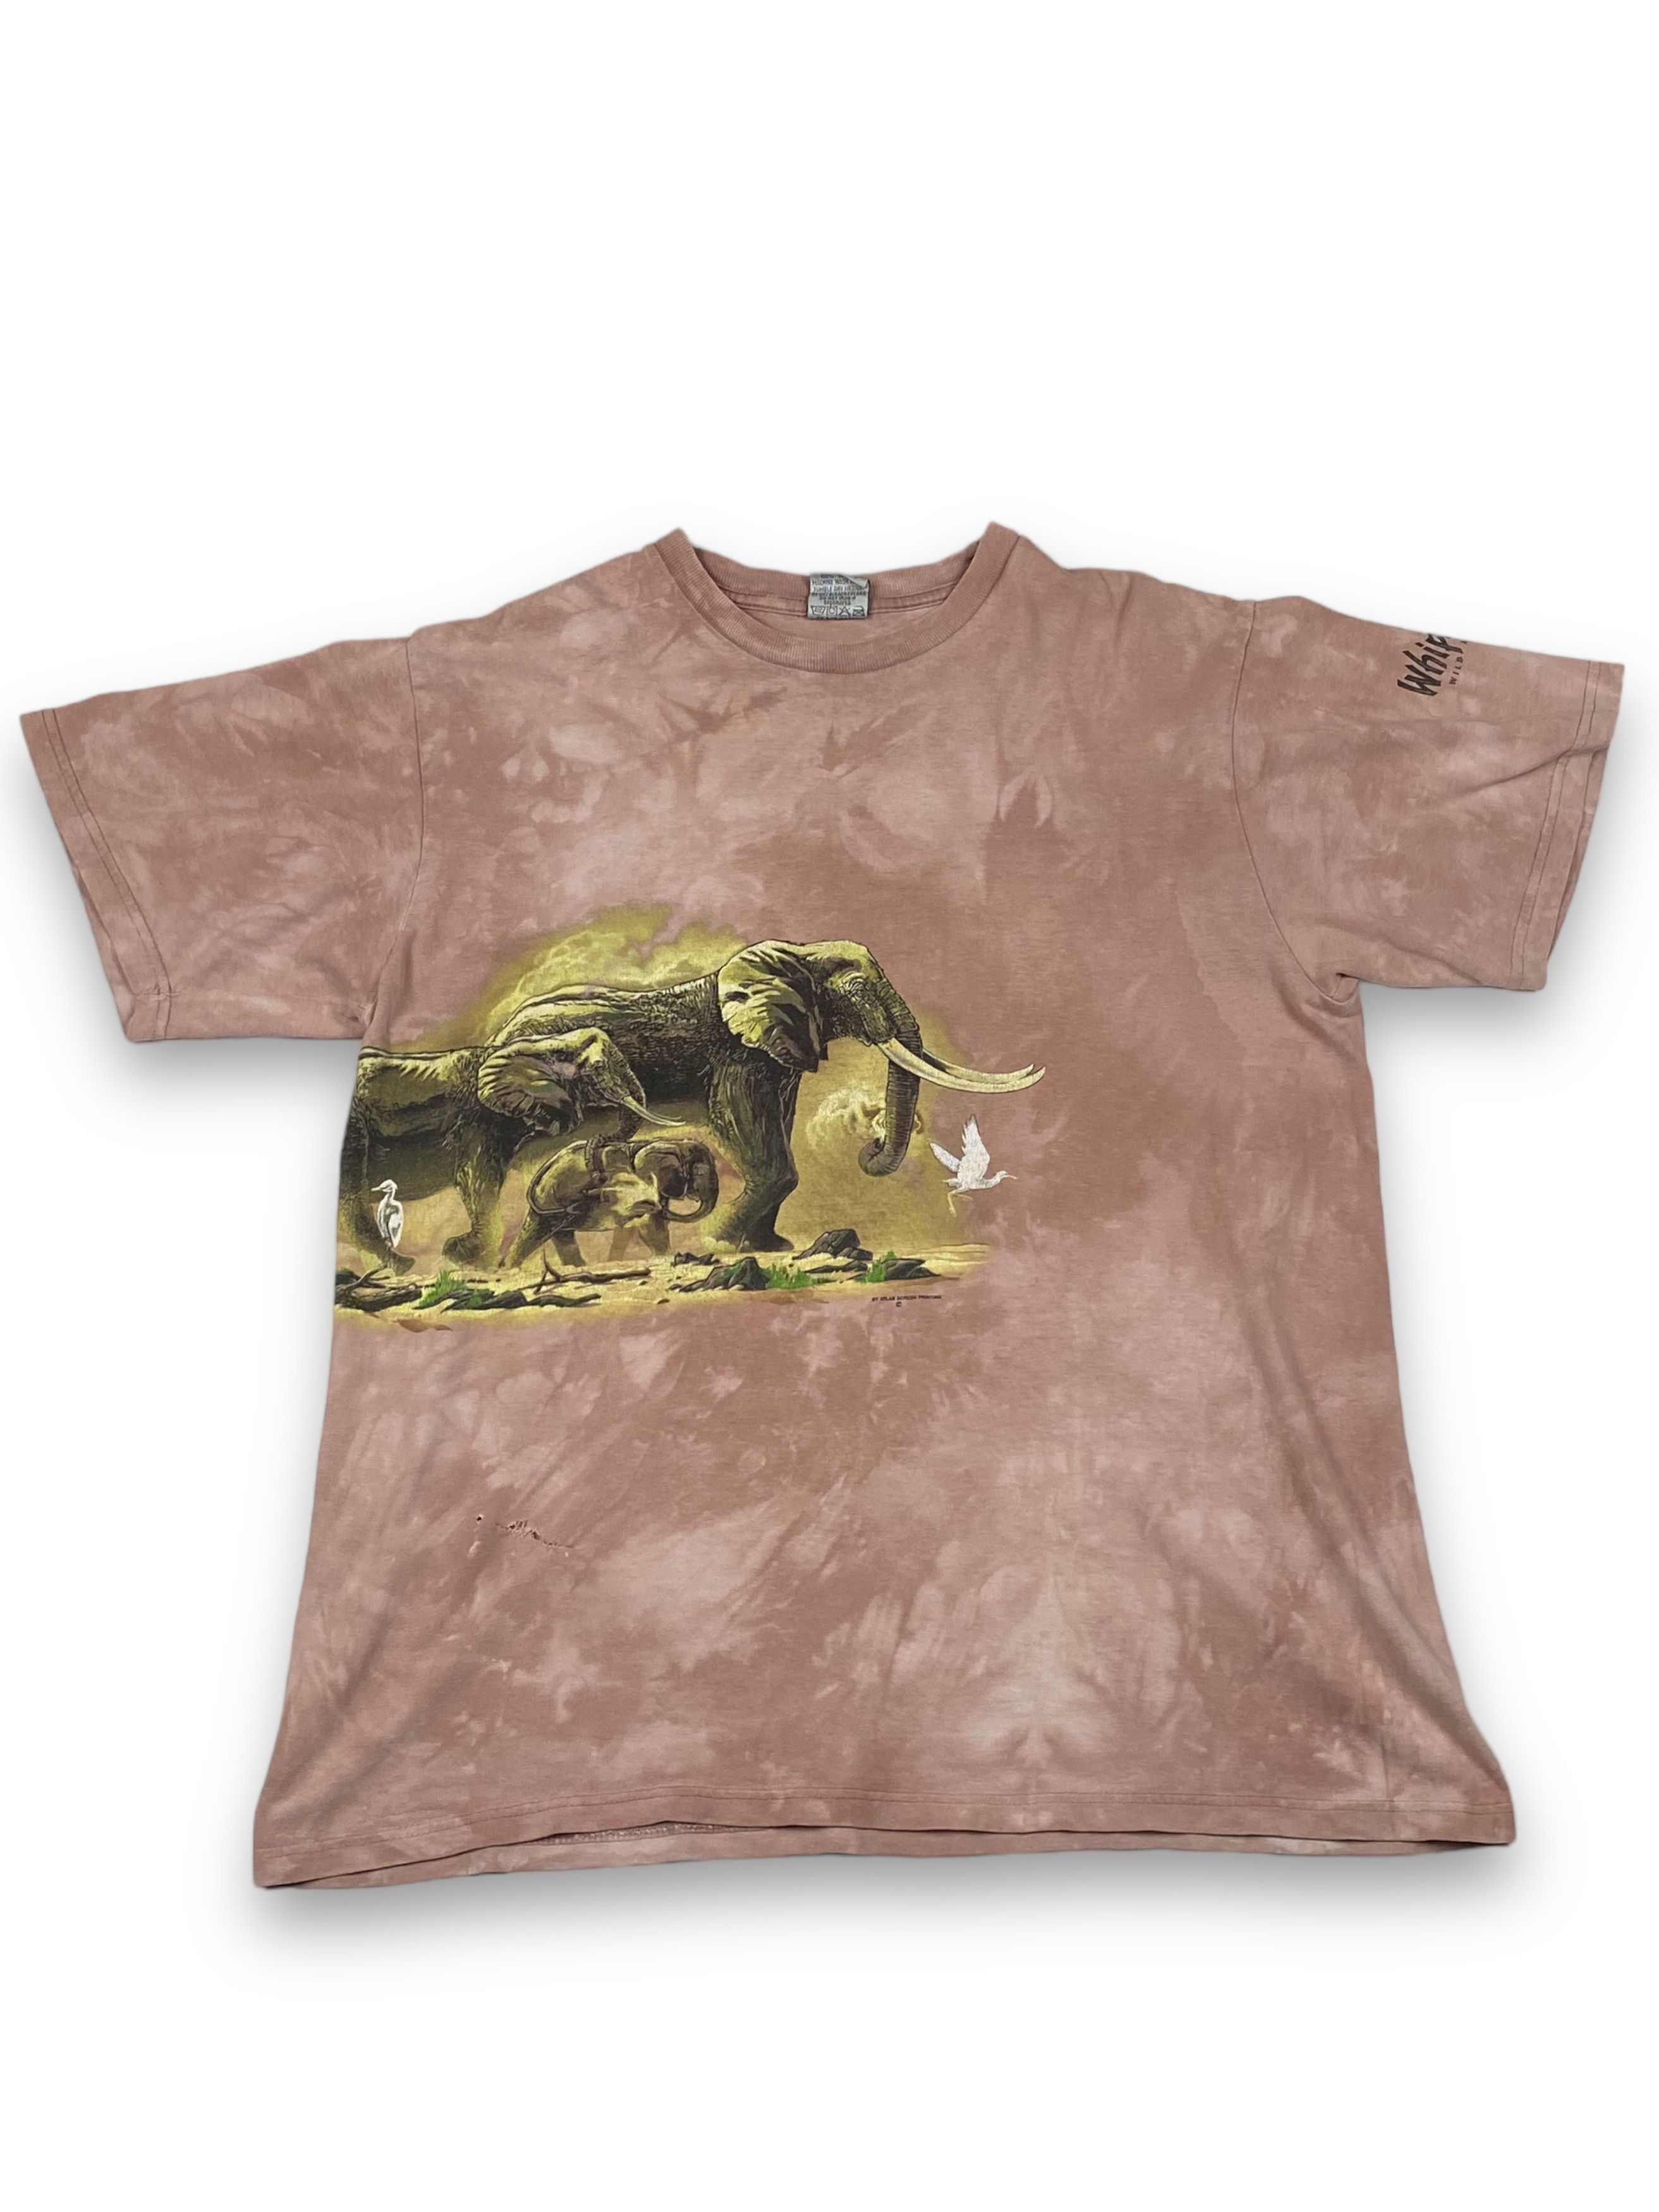 Pre-owned Animal Tee X Vintage 00s Vintage Harlequin Elephants Family Dyed T-shirt M702 In Beige Dyed